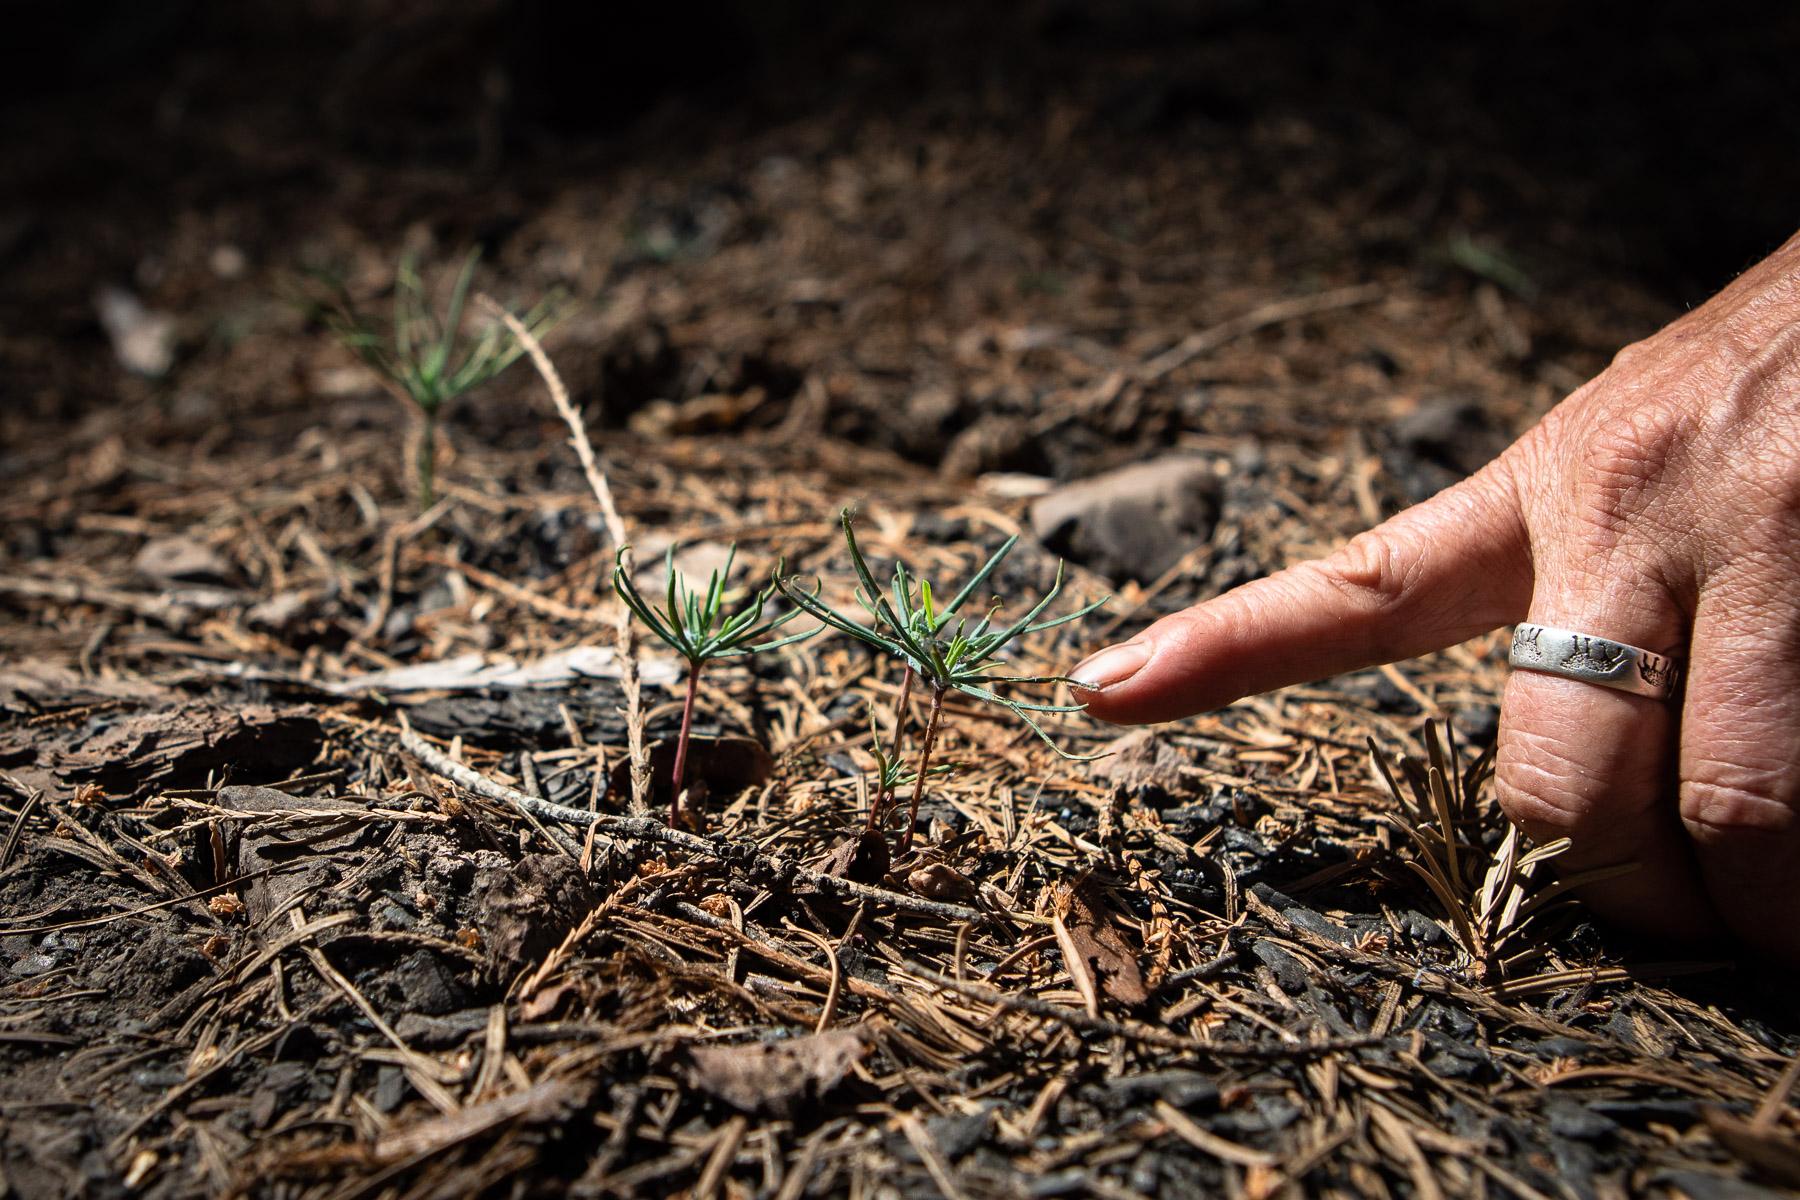 - Sequoia, a year in a burning forest - Seedlings discovered in a burn area in Alder creek. This...